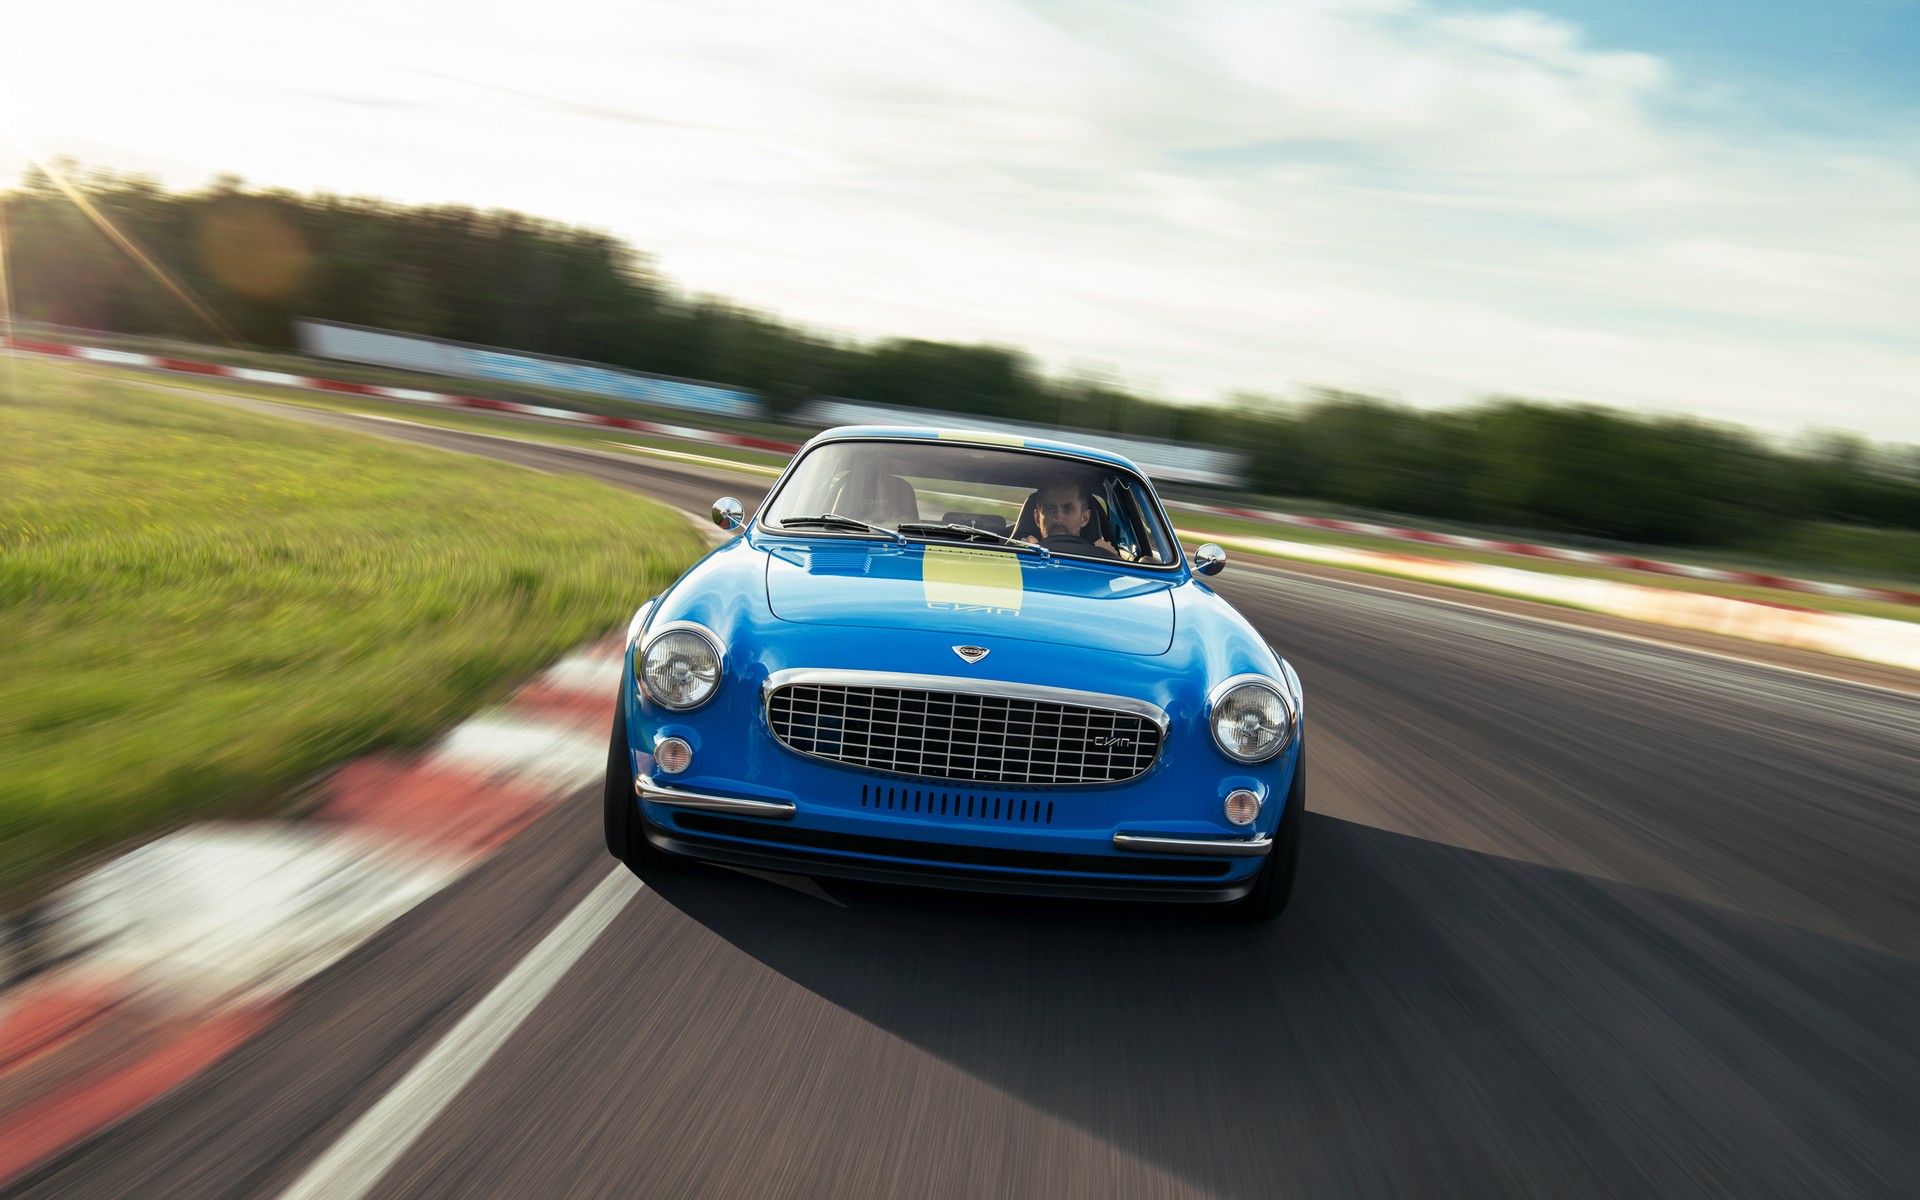 Cyan Racing's Volvo P1800 Restomod arrives in the United States with a $ 700,000 label